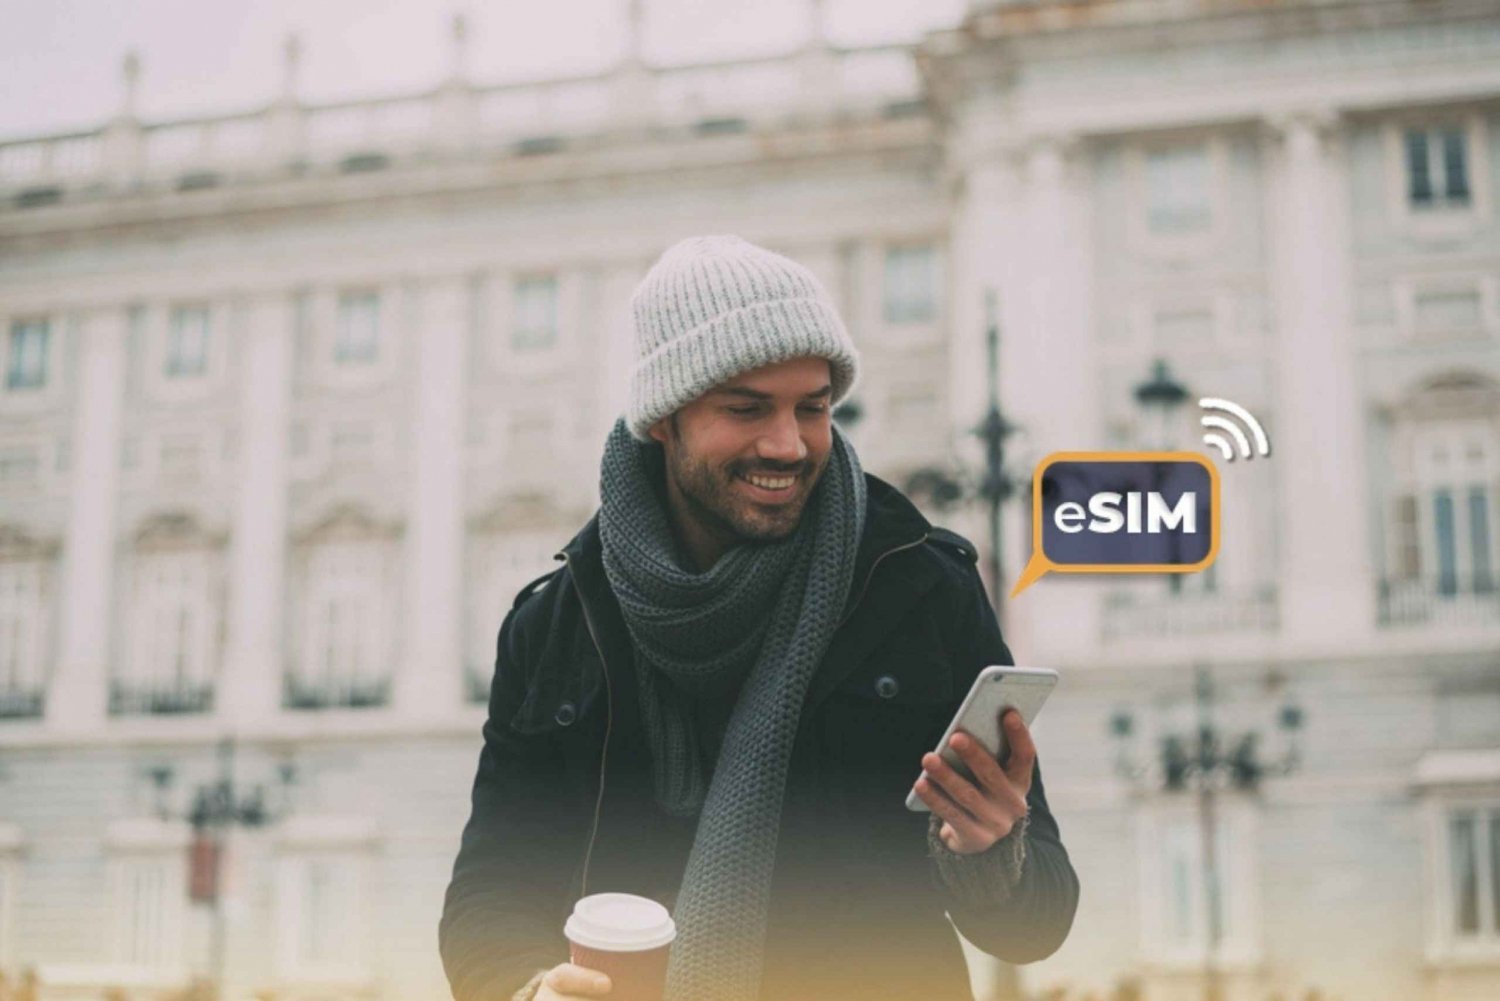 Madrid and Spain: Unlimited EU Internet and Mobile Data eSIM